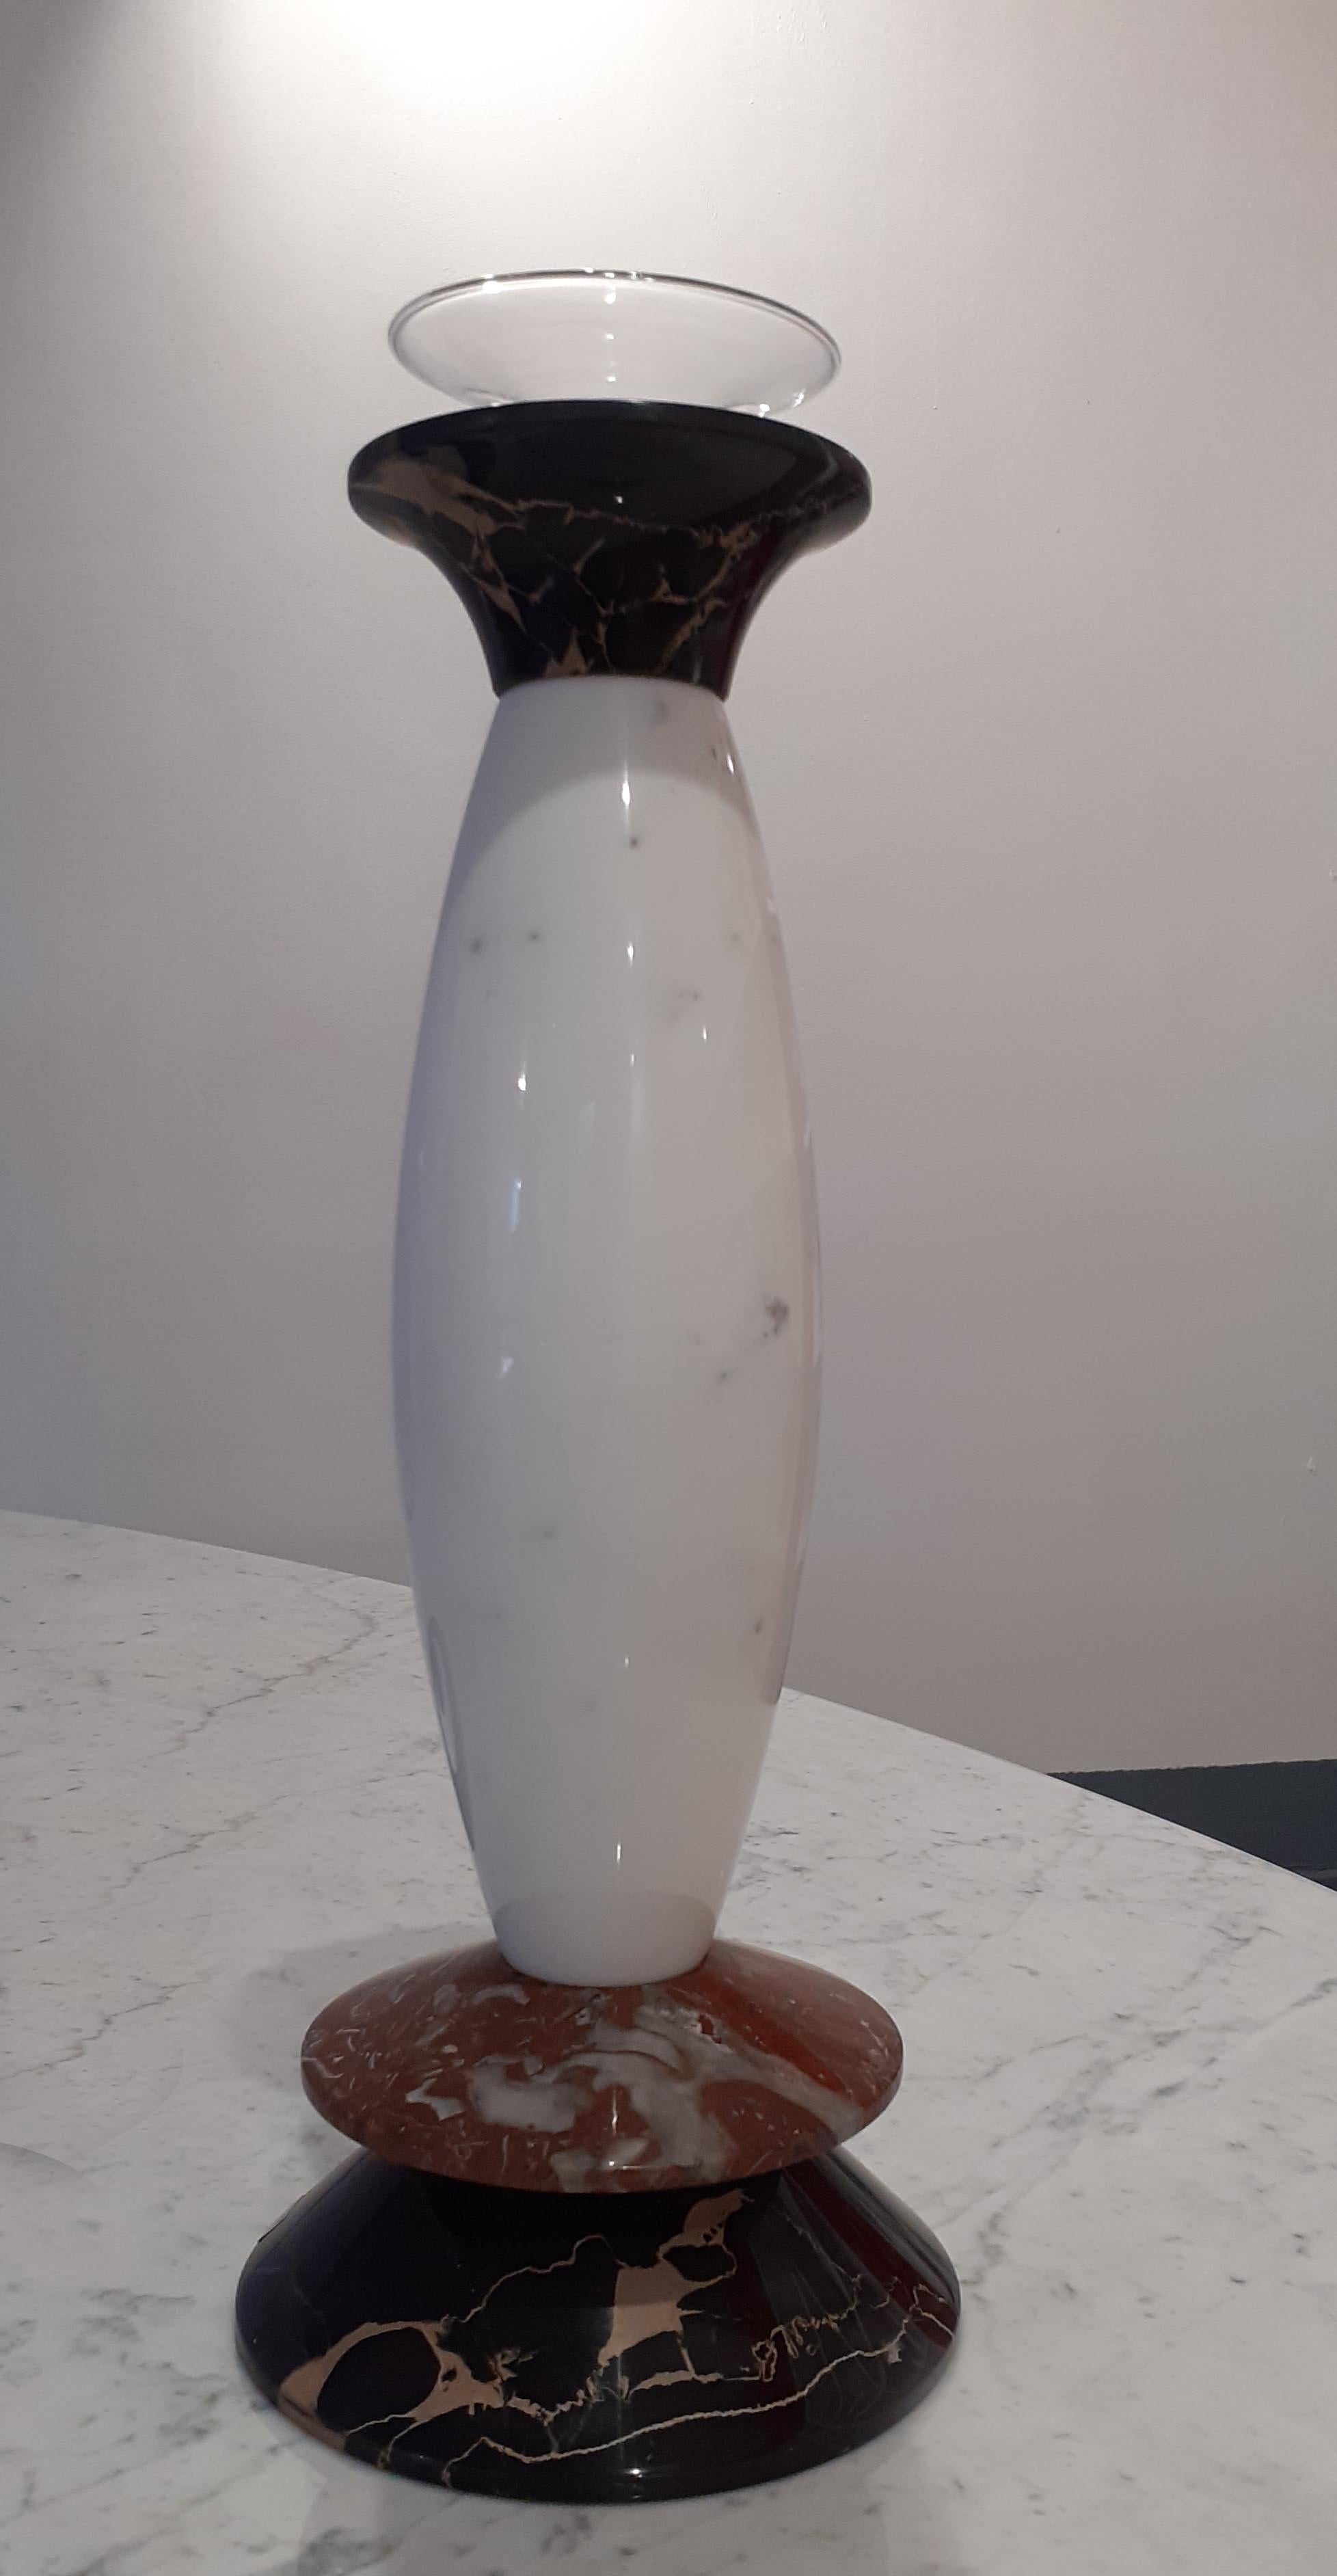 Description: Big marble and blown glass vase designed in 1986 by Matteo Thun and realized with three different material, Nero Portoro, Bianco Carrara Rosso Francia.

Size: Cm. Ø 16 x 40 H.
Materials: Bianco Carrara + Nero Portoro + Rosso Francia